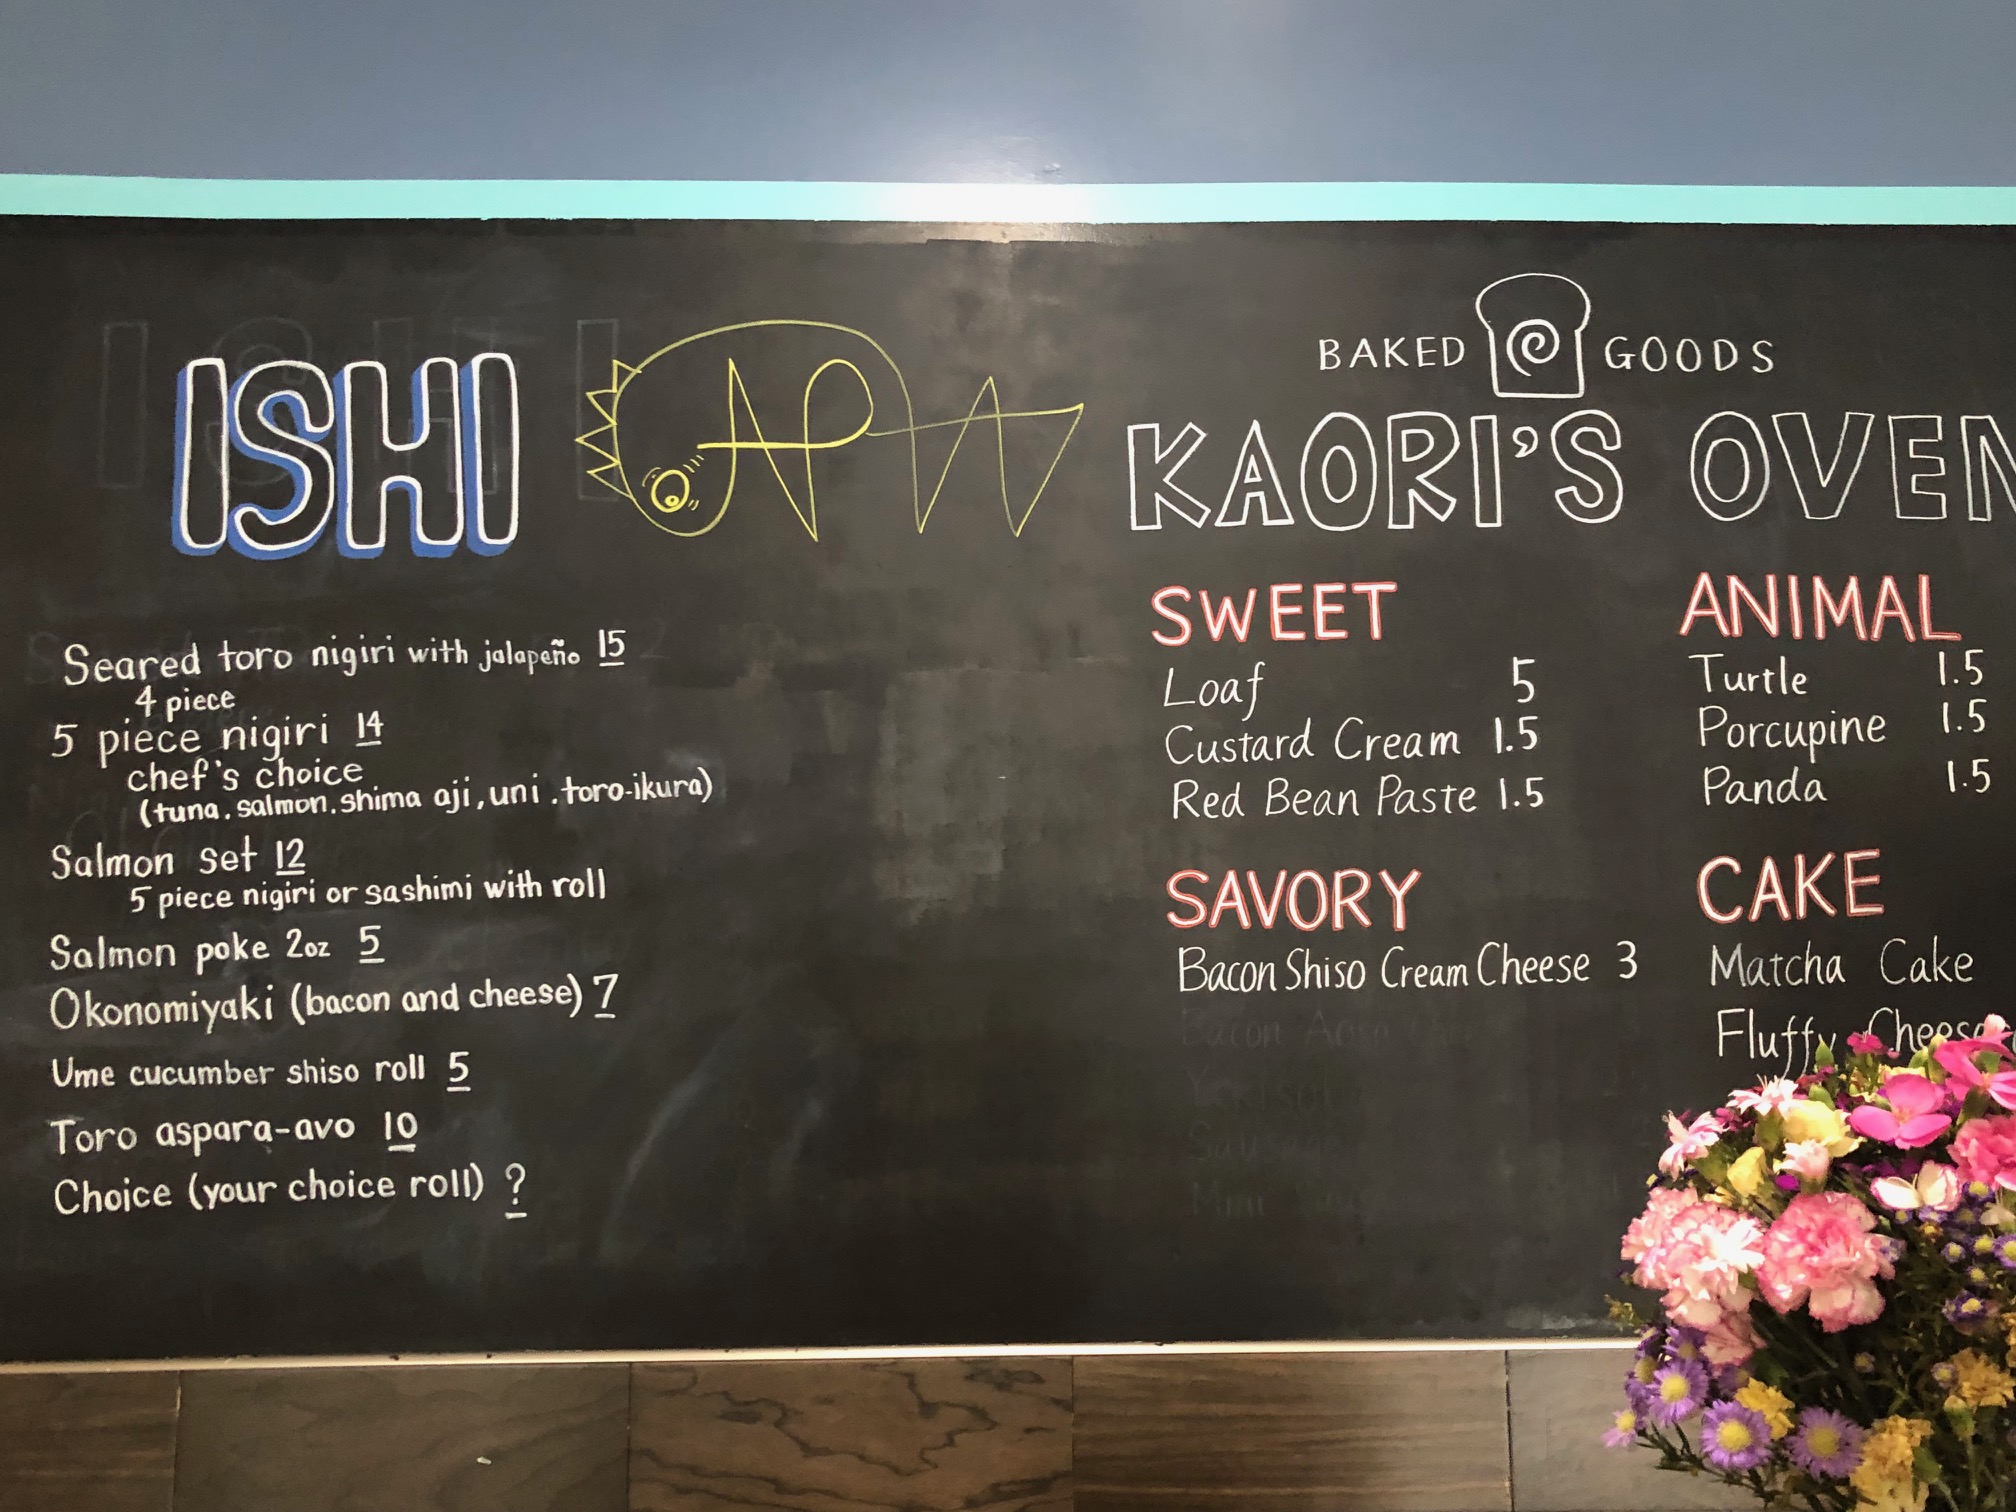 On a large black chalkboard, there are two sides of available options. On the left, there is ISHI and a handwritten list of sushi dishes and the price. On the right side is Kaori's Oven which has desserts listed by Sweet, Savory, or Animal. Photo by Alyssa Buckley.